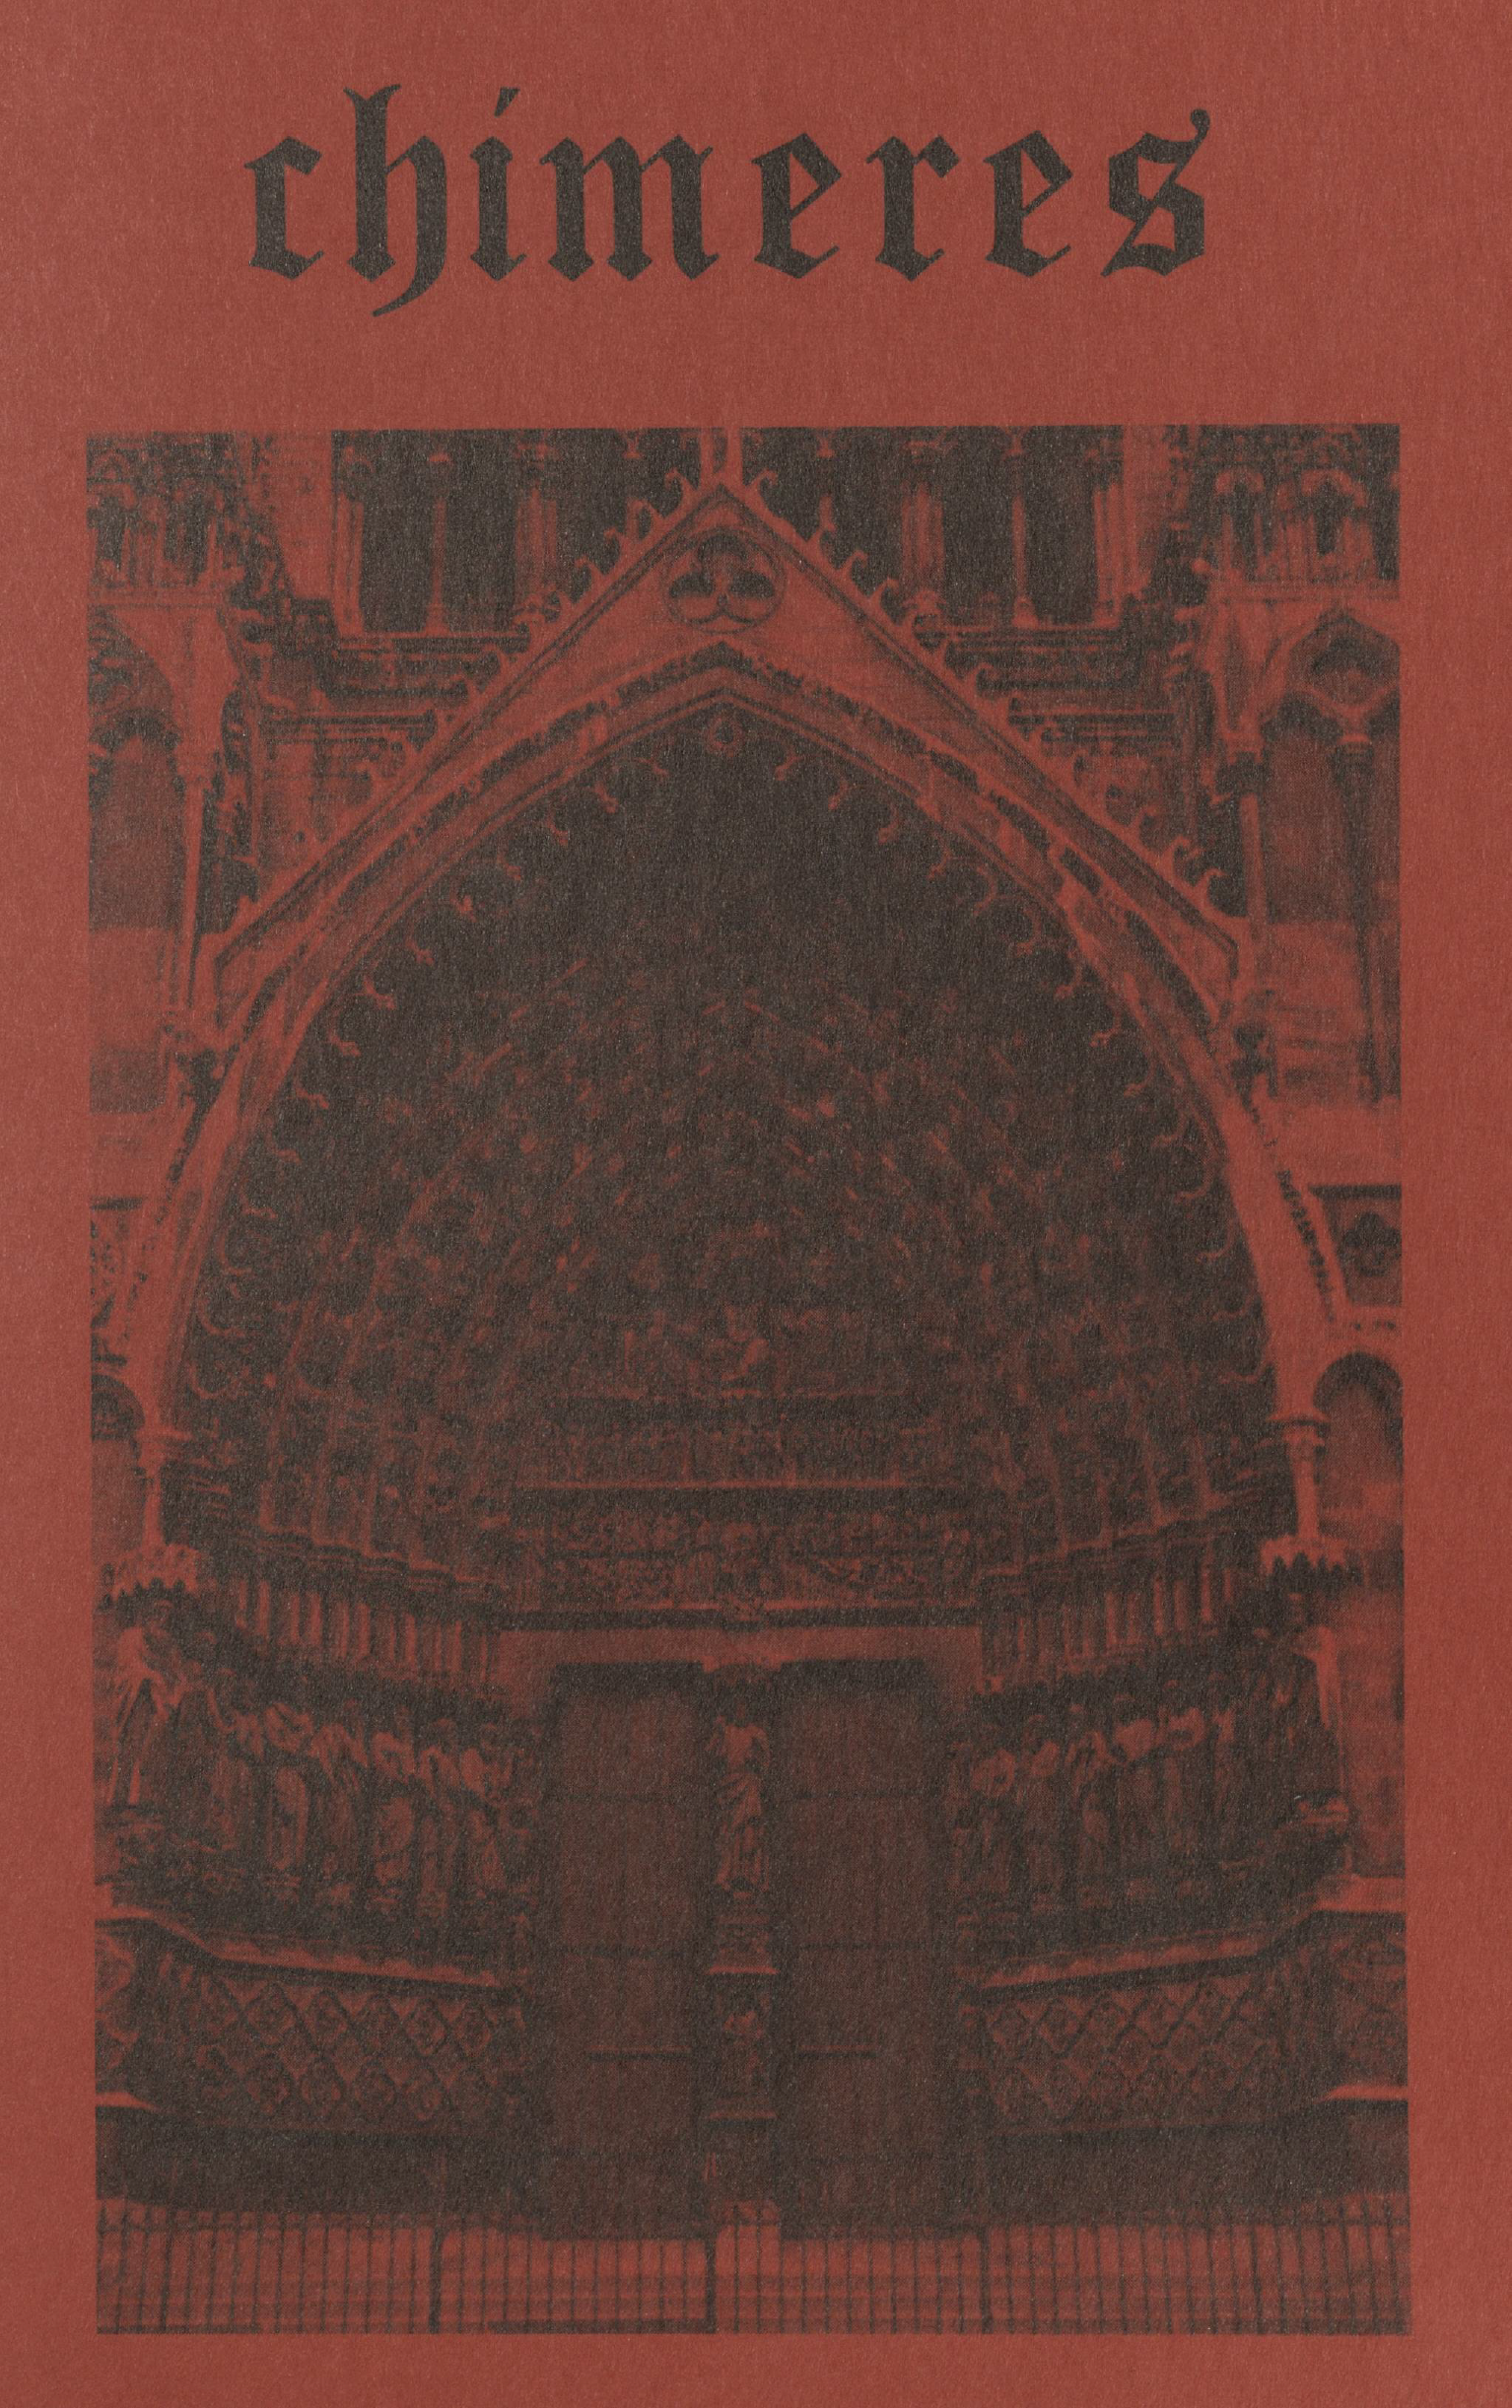 Cover for Chimères, Vol 4.1, Winter 1970